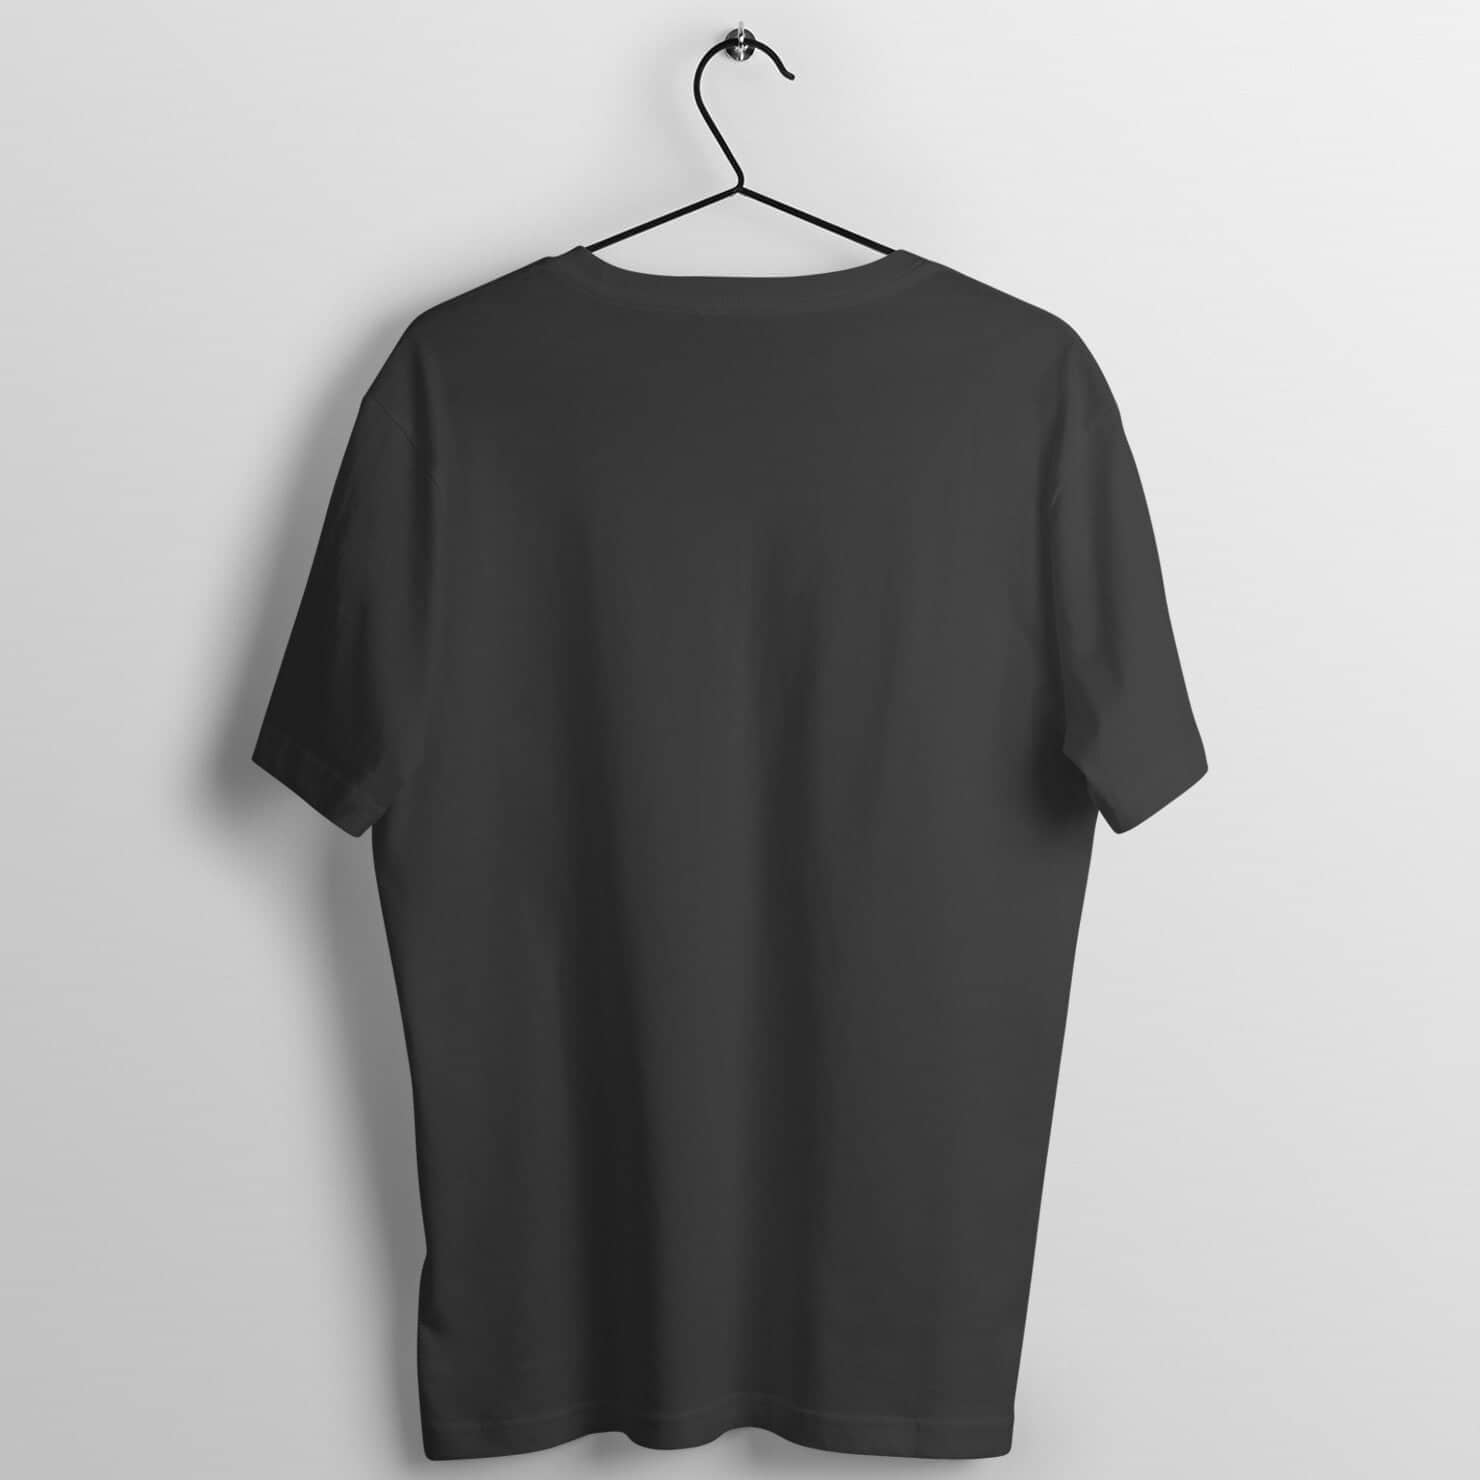 The Remix Exclusive Black T Shirt for Men and Women Printrove 